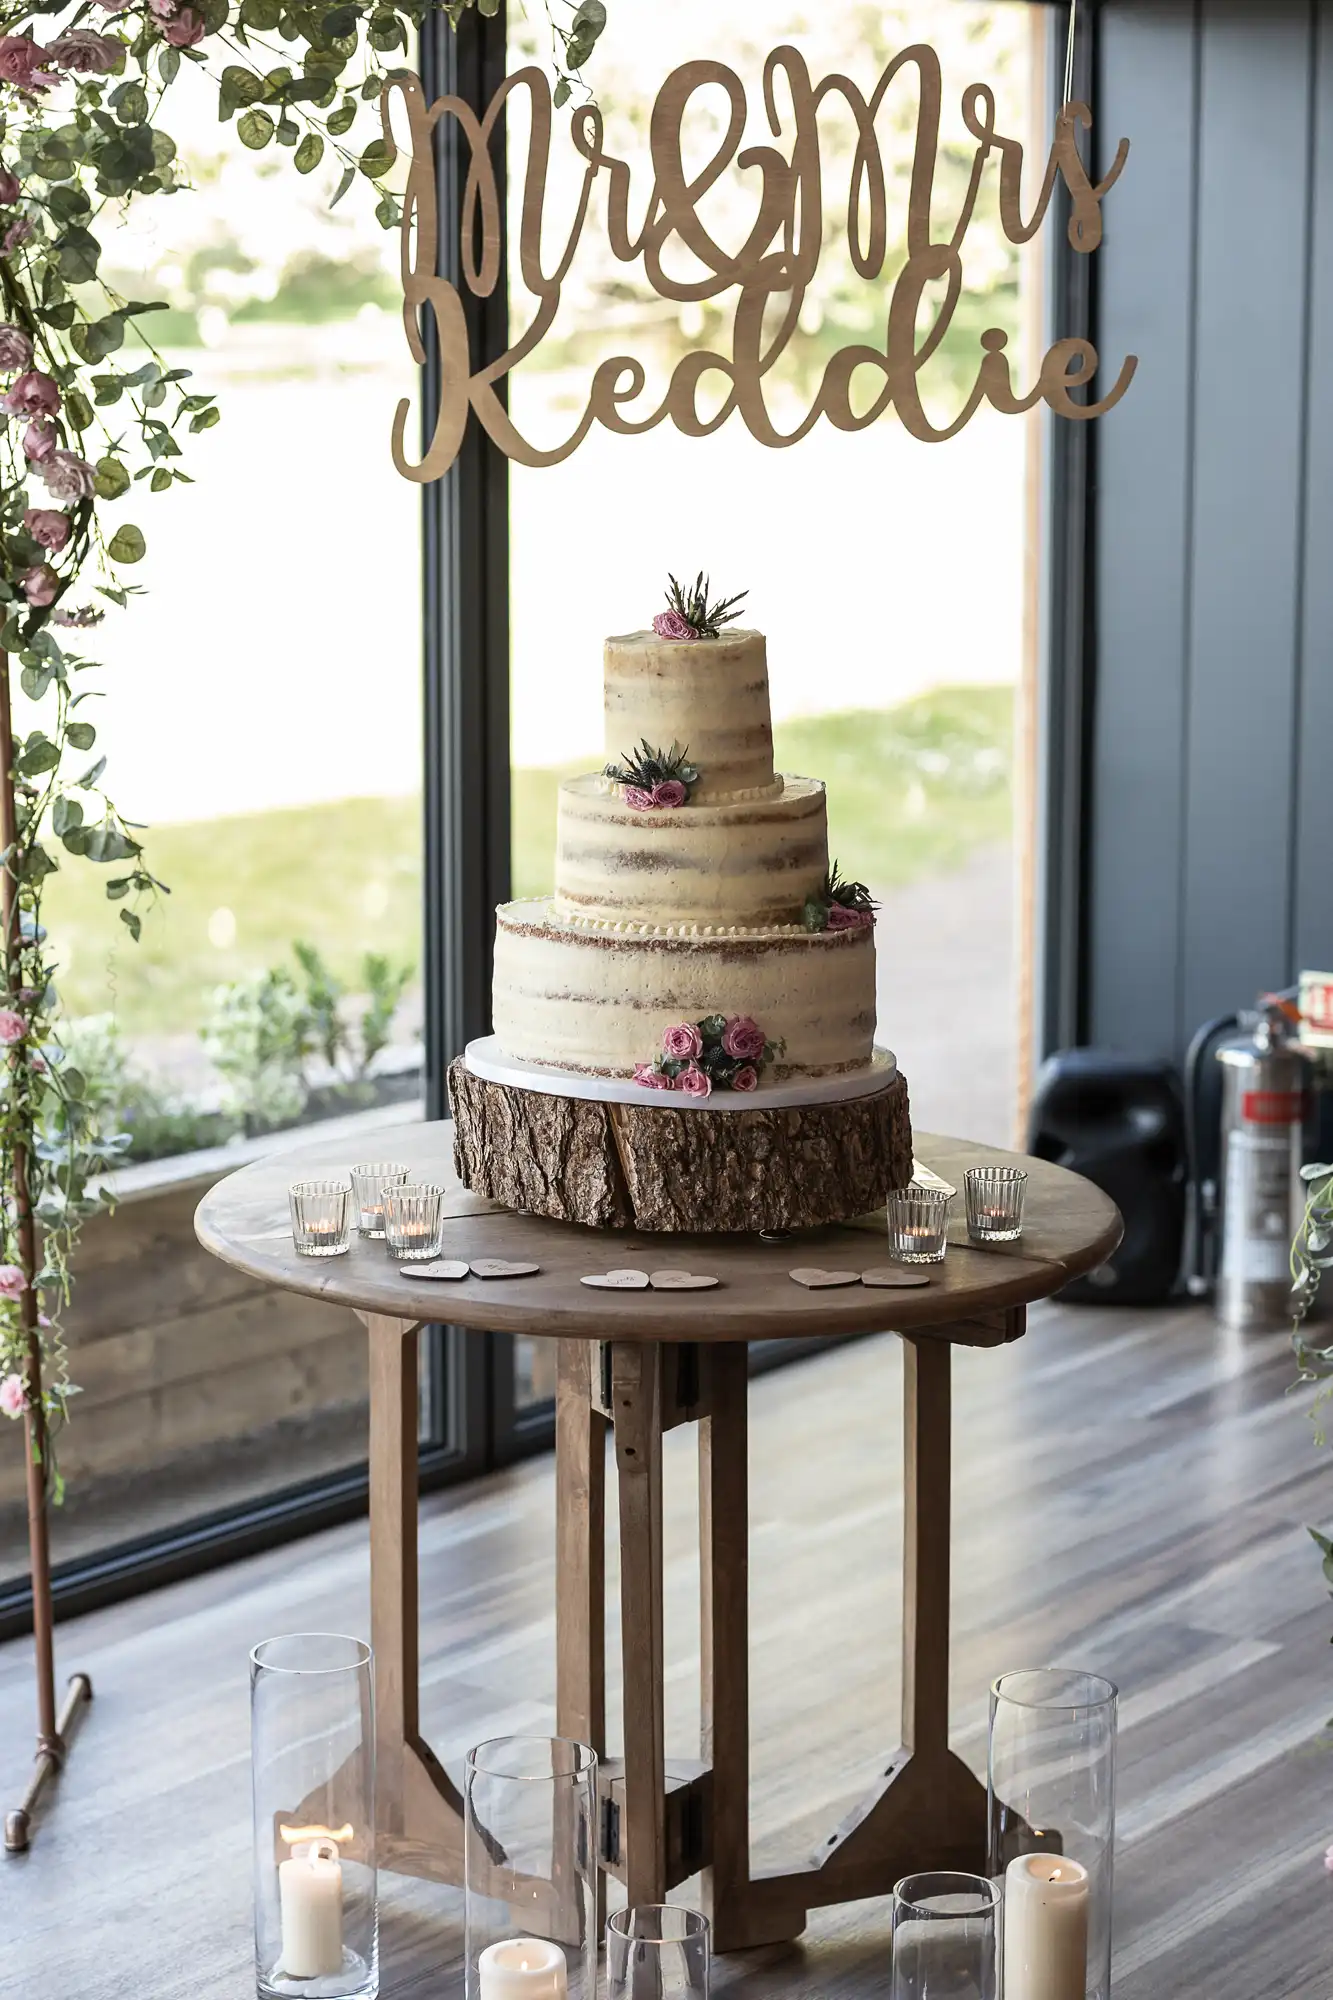 A three-tiered wedding cake decorated with floral accents on a wooden stand, displayed under a "mr & mrs" sign by a window, surrounded by lit candles.